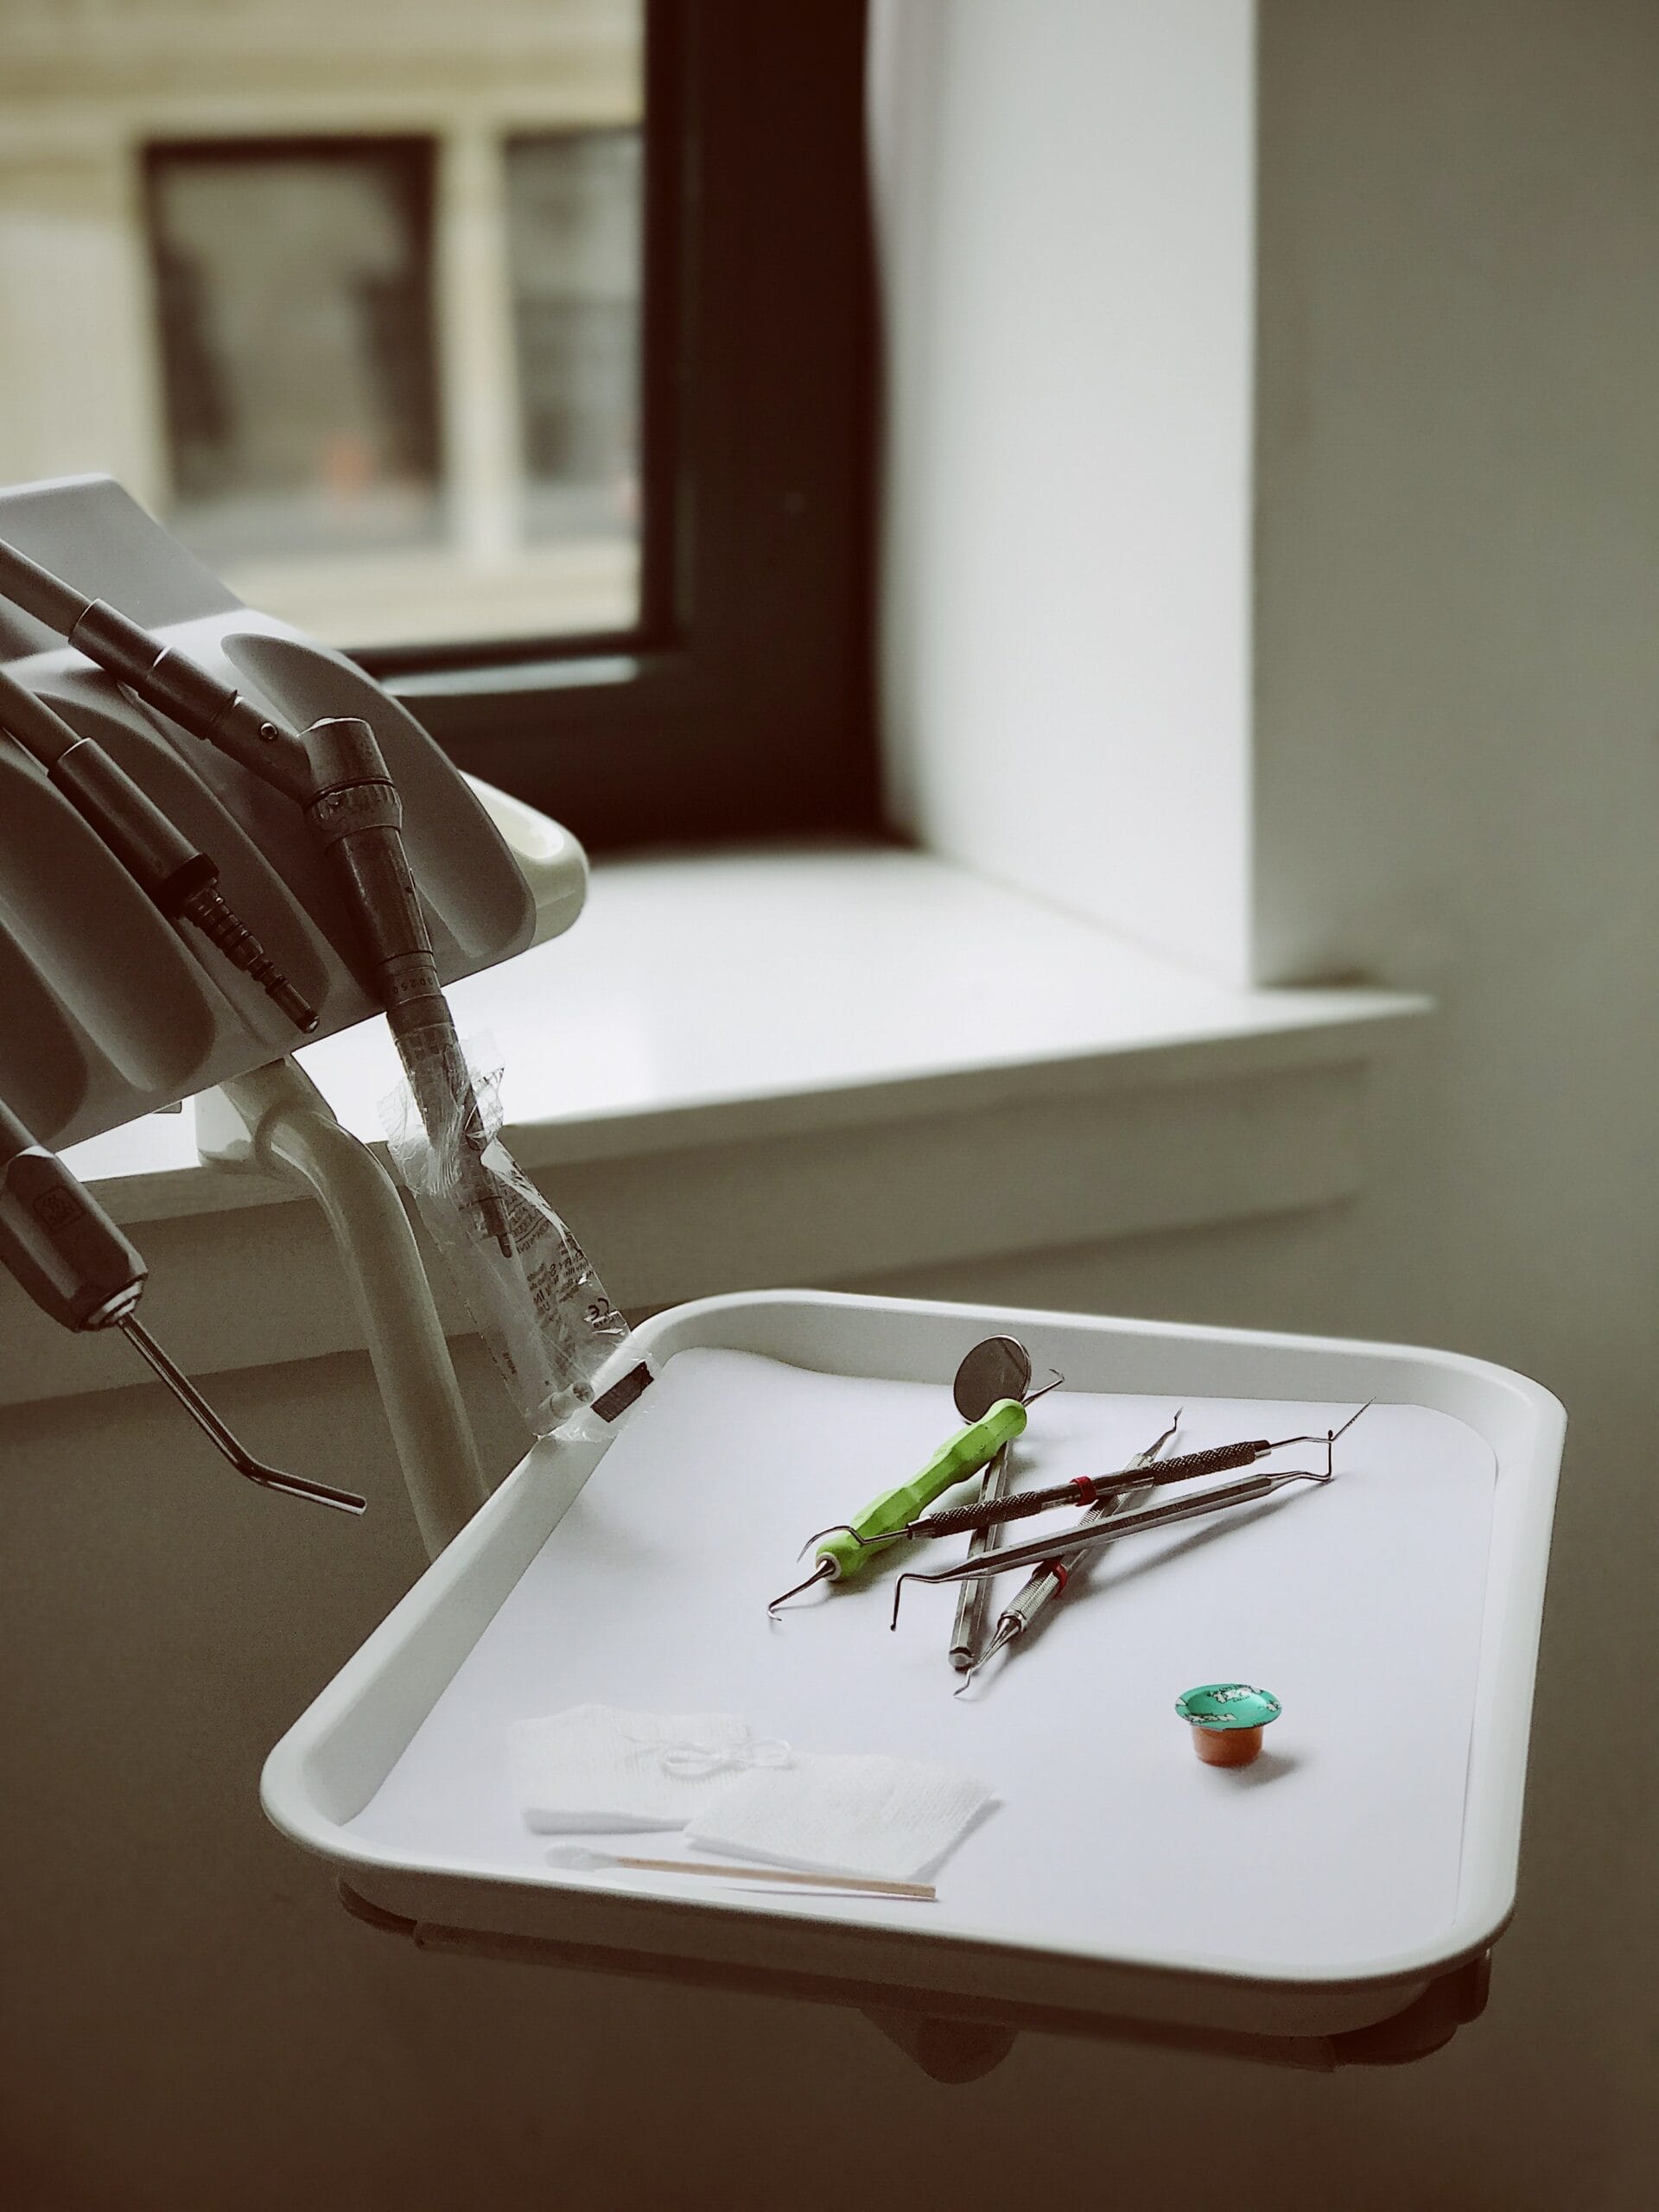 Why You Should Visit Your Hygienist Every Six Months